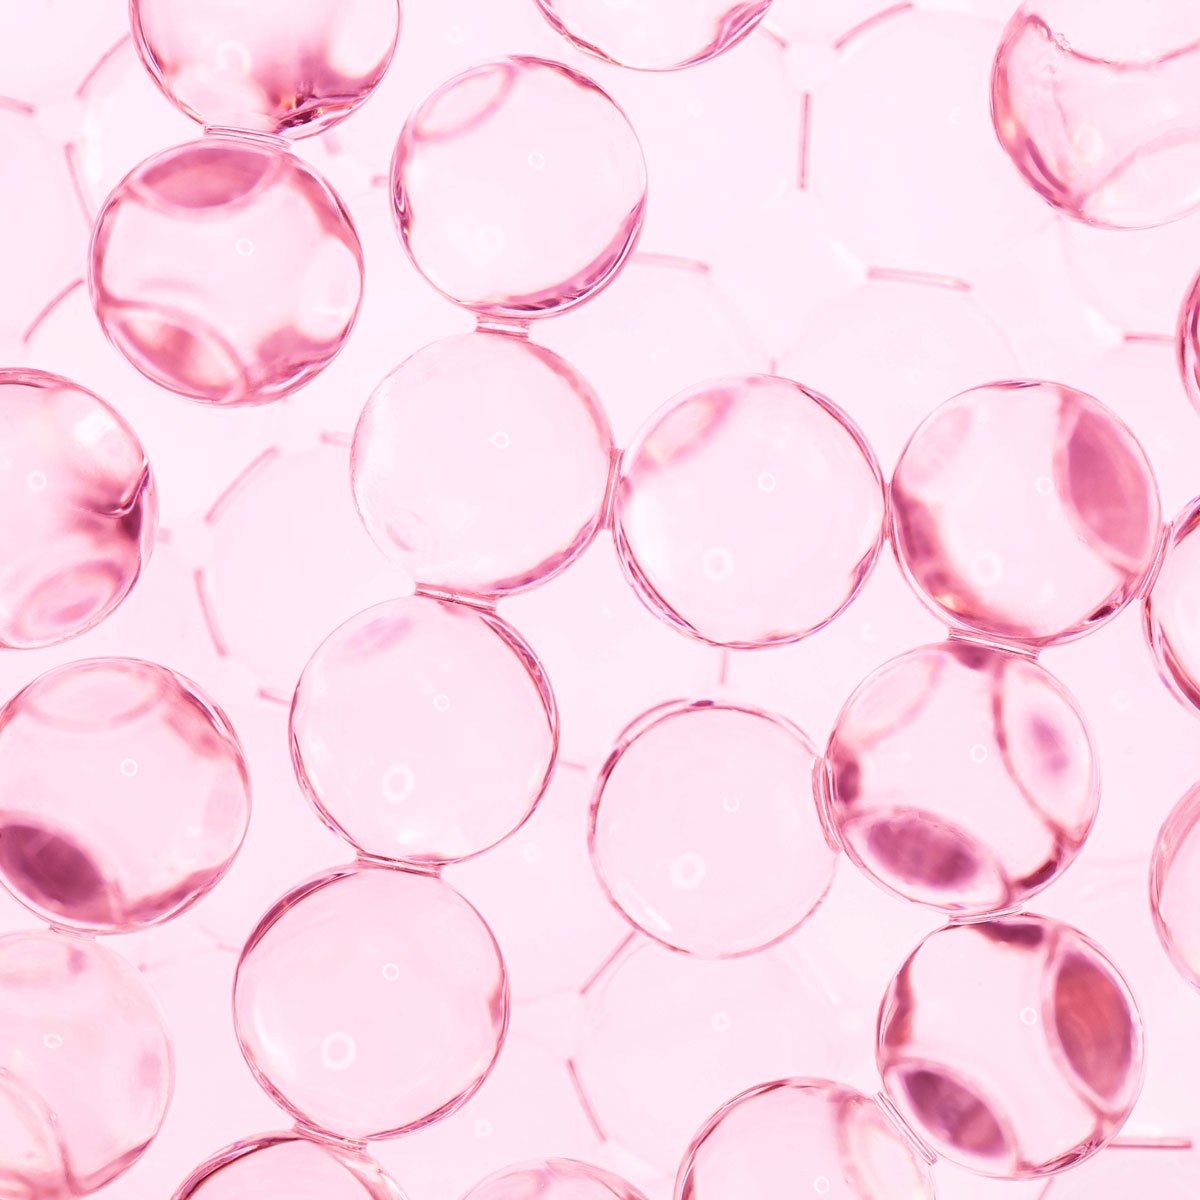 Pink circles for vitamin c and peptides